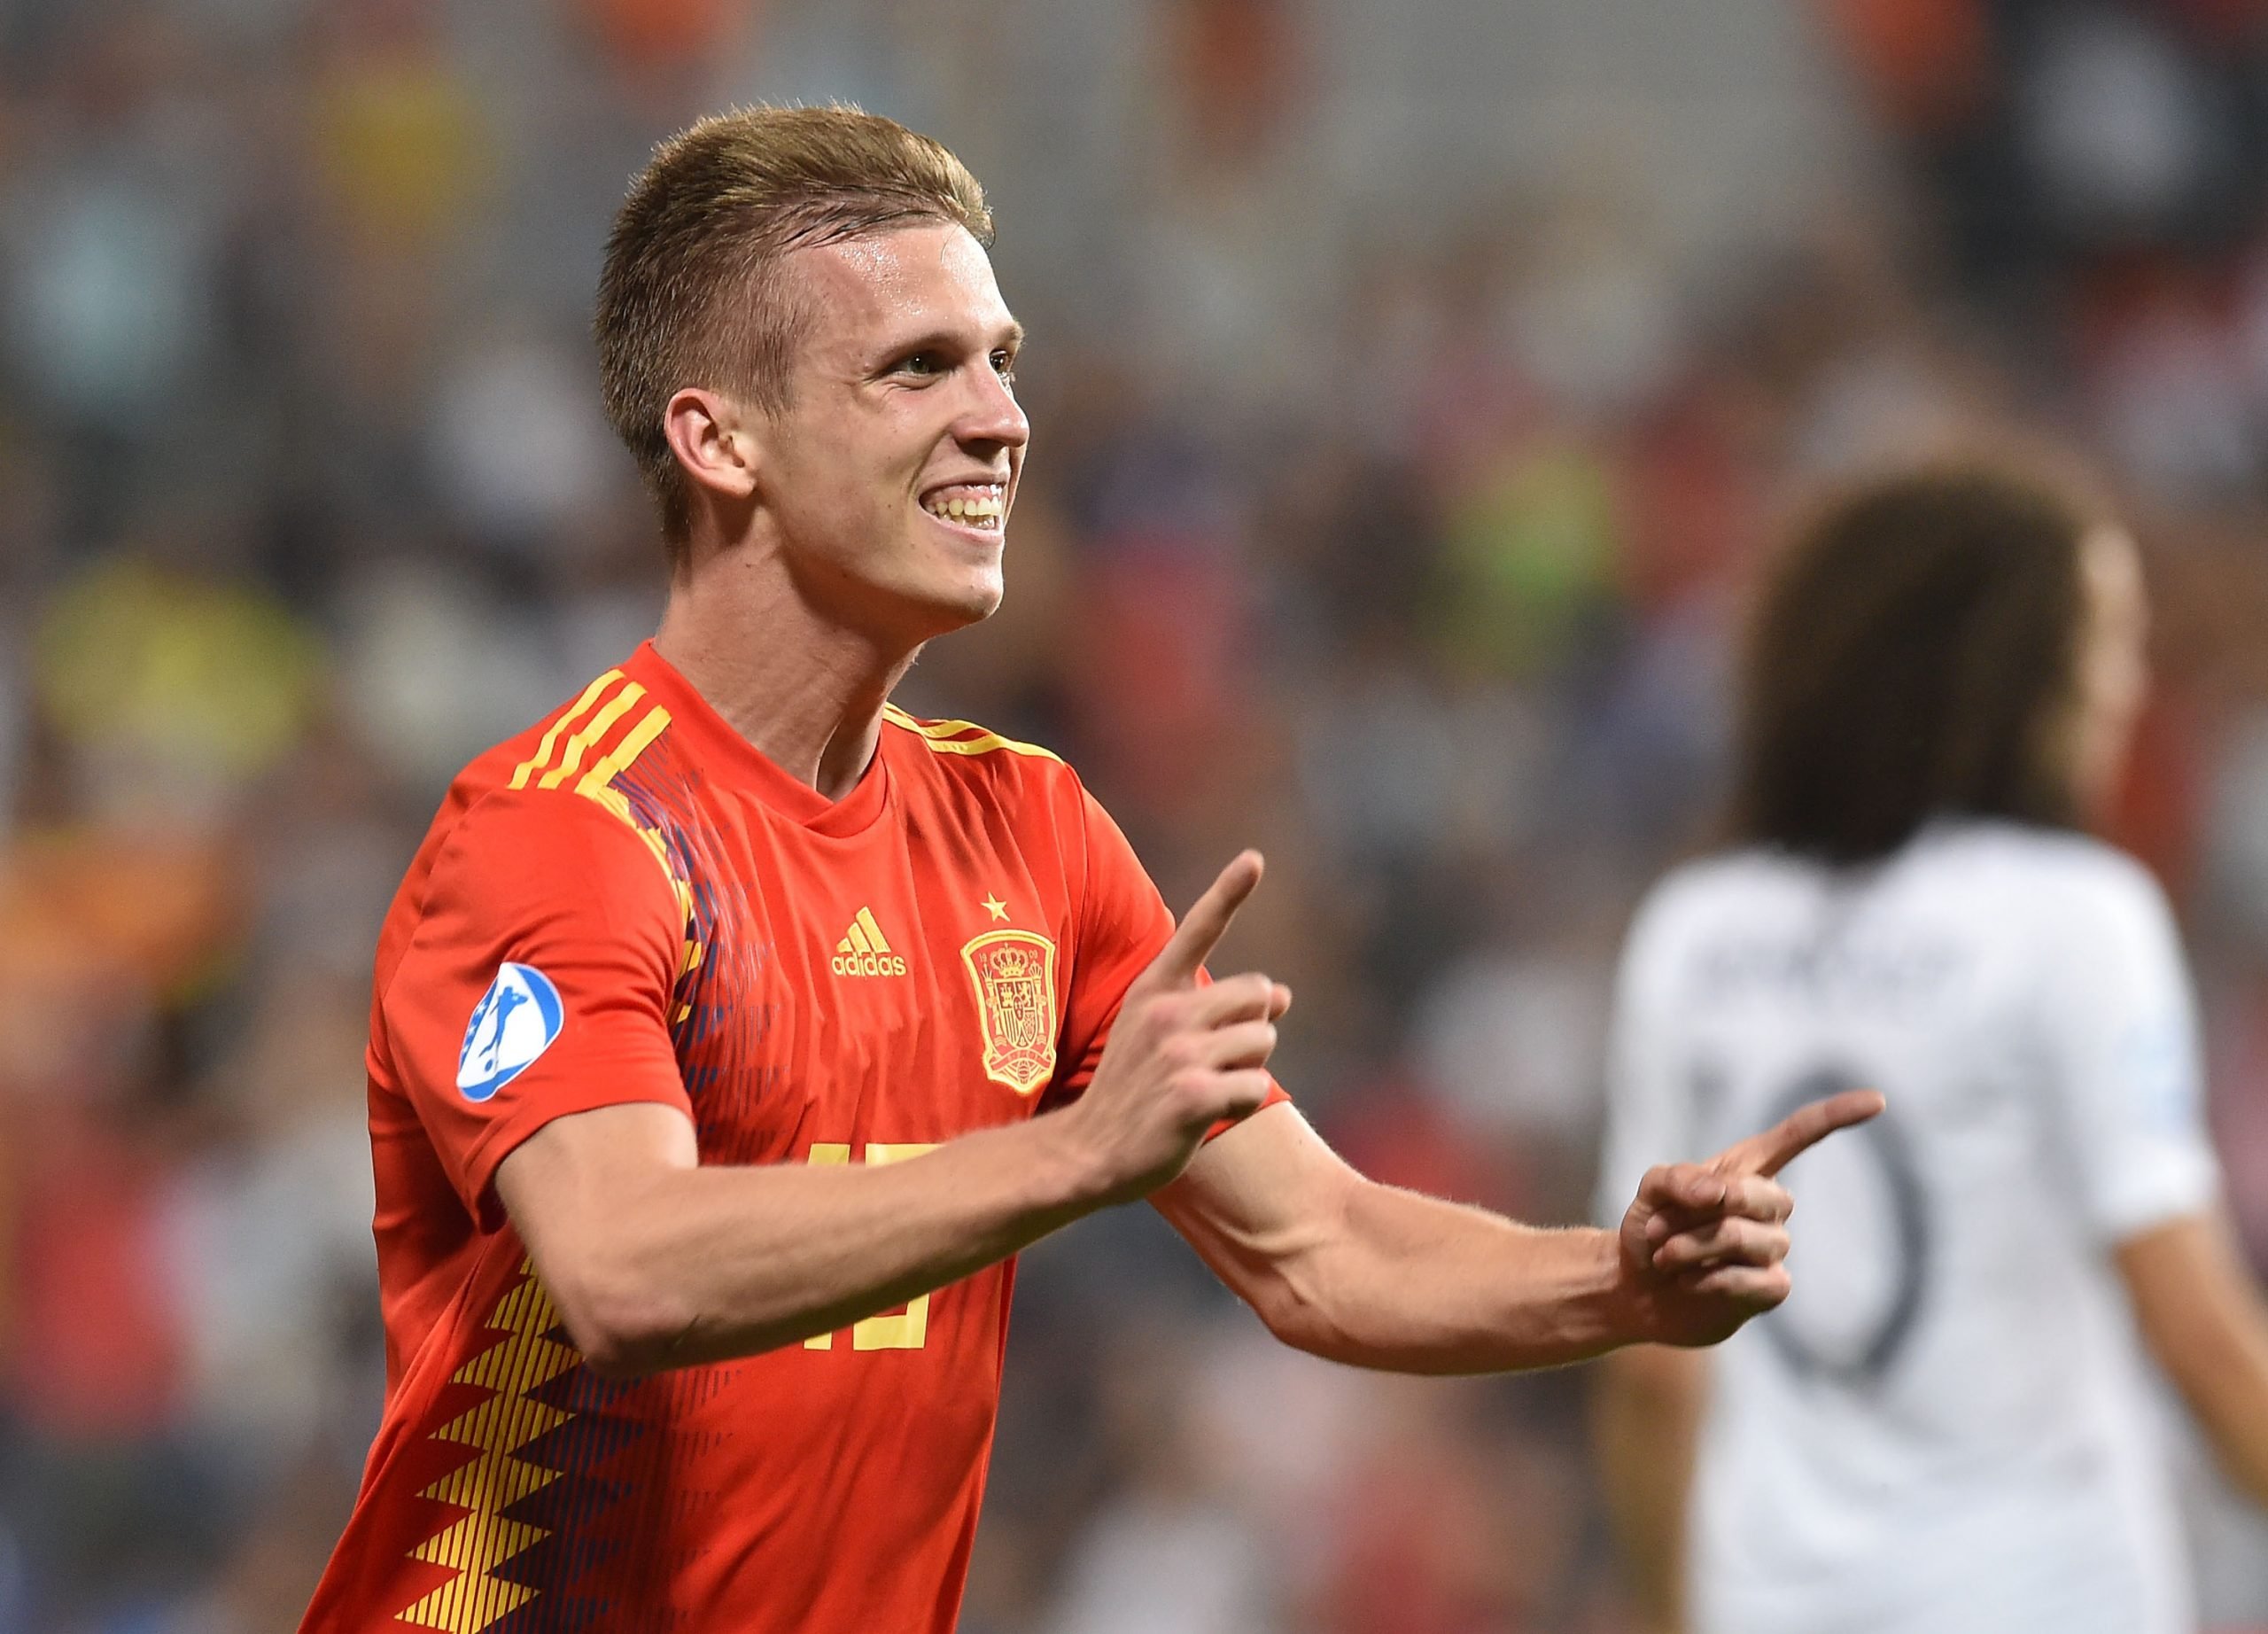 REGGIO NELL'EMILIA, ITALY - JUNE 27:  Dani Olmo of Spain celebrates after scoring goal 3-1 during the 2019 UEFA U-21 Semi-Final match between Spain and France at Mapei Stadium - Citta' del Tricolore on June 27, 2019 in Reggio nell'Emilia, Italy.  (Photo by Giuseppe Bellini/Getty Images)